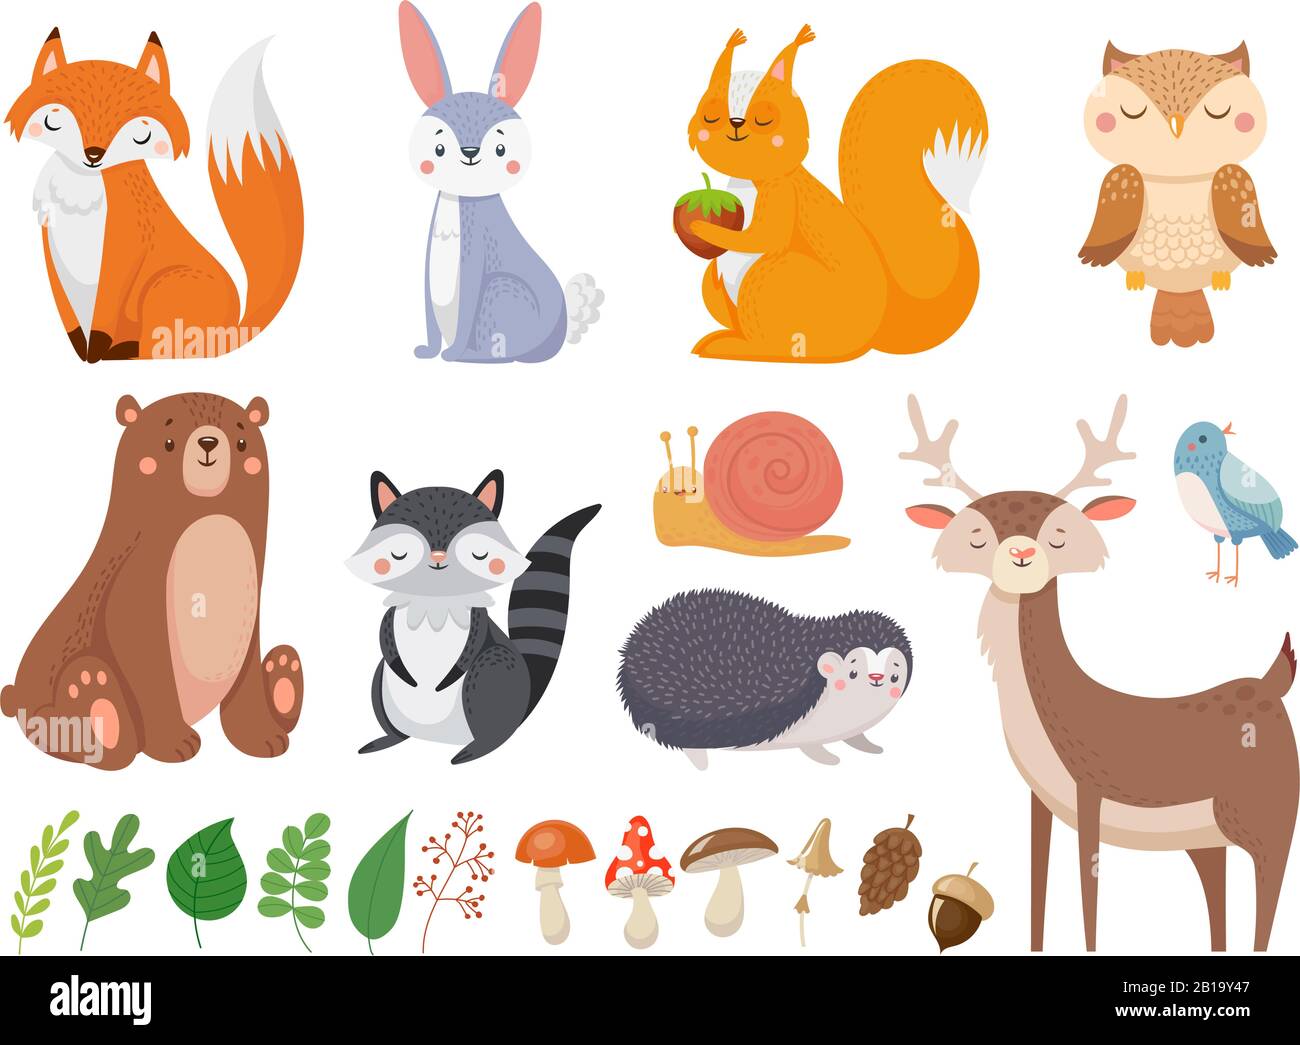 Cute woodland animals. Wild animal, forest flora and fauna elements isolated cartoon vector illustration set Stock Vector